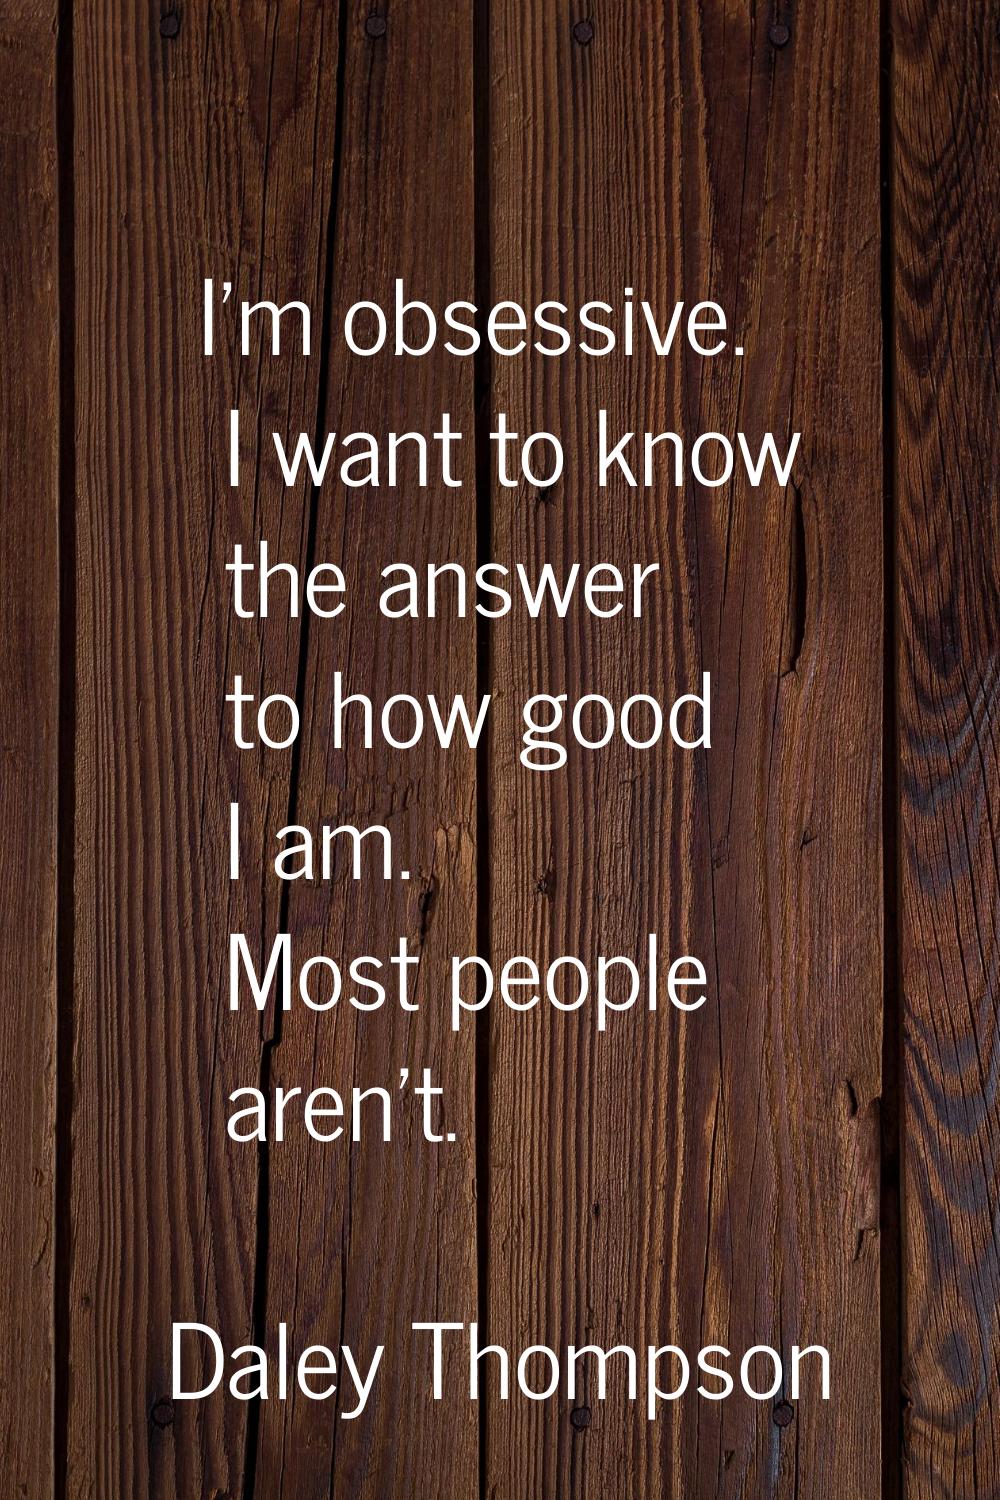 I'm obsessive. I want to know the answer to how good I am. Most people aren't.